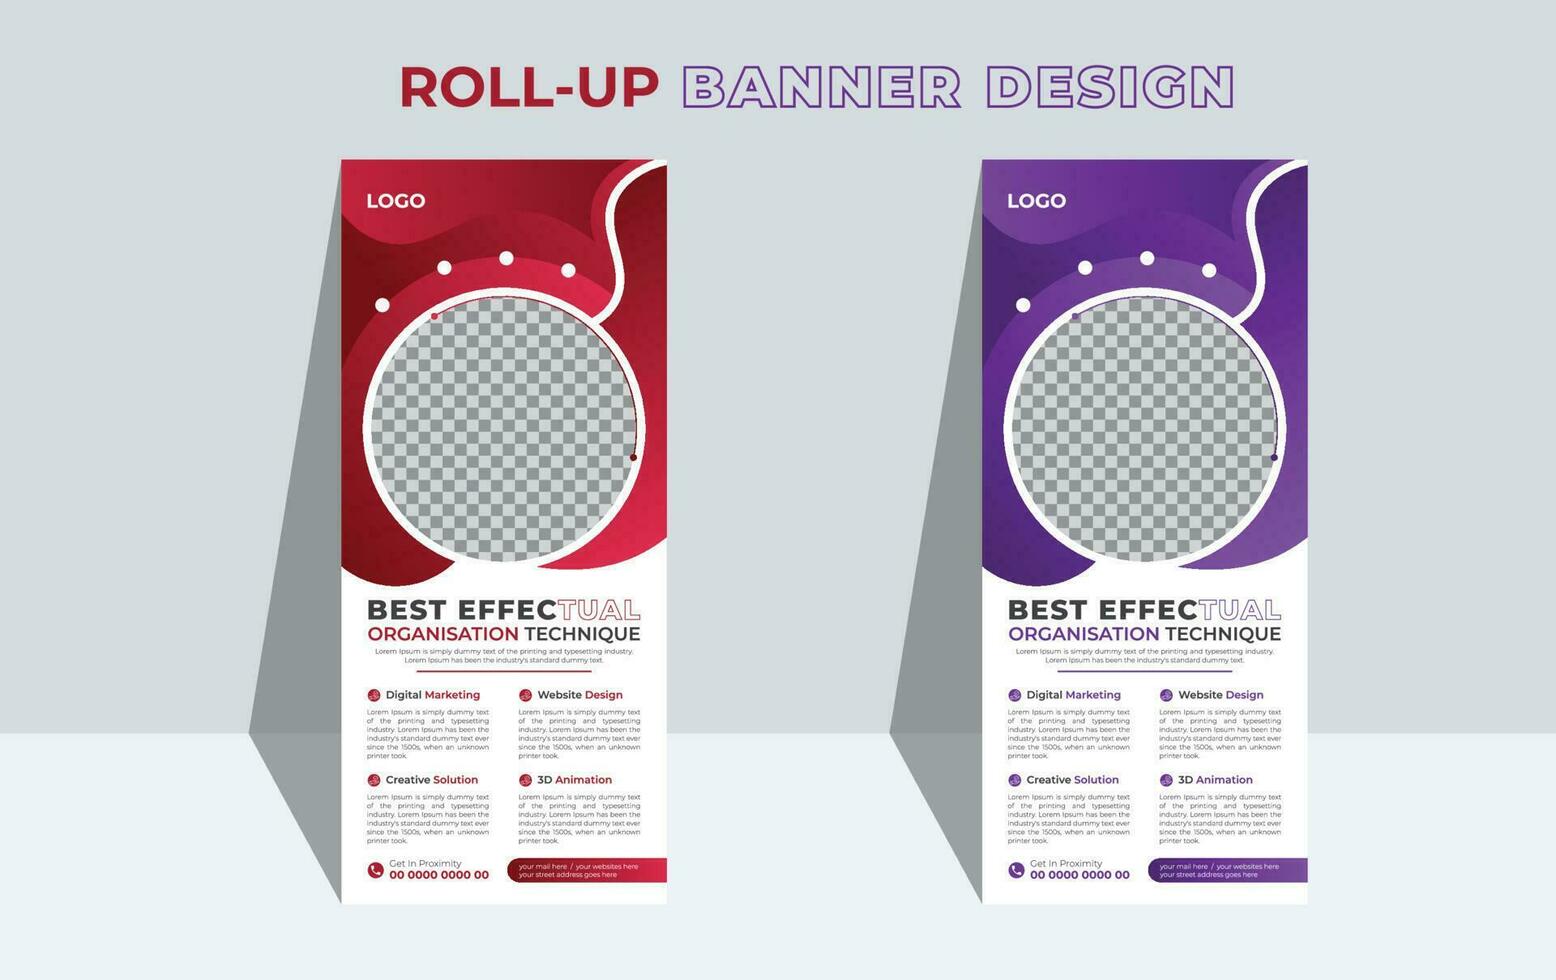 Modern Corporate Roll Up Banner Design or X banner Stand Template. Professional business pull up display exhibition standee banner. vector